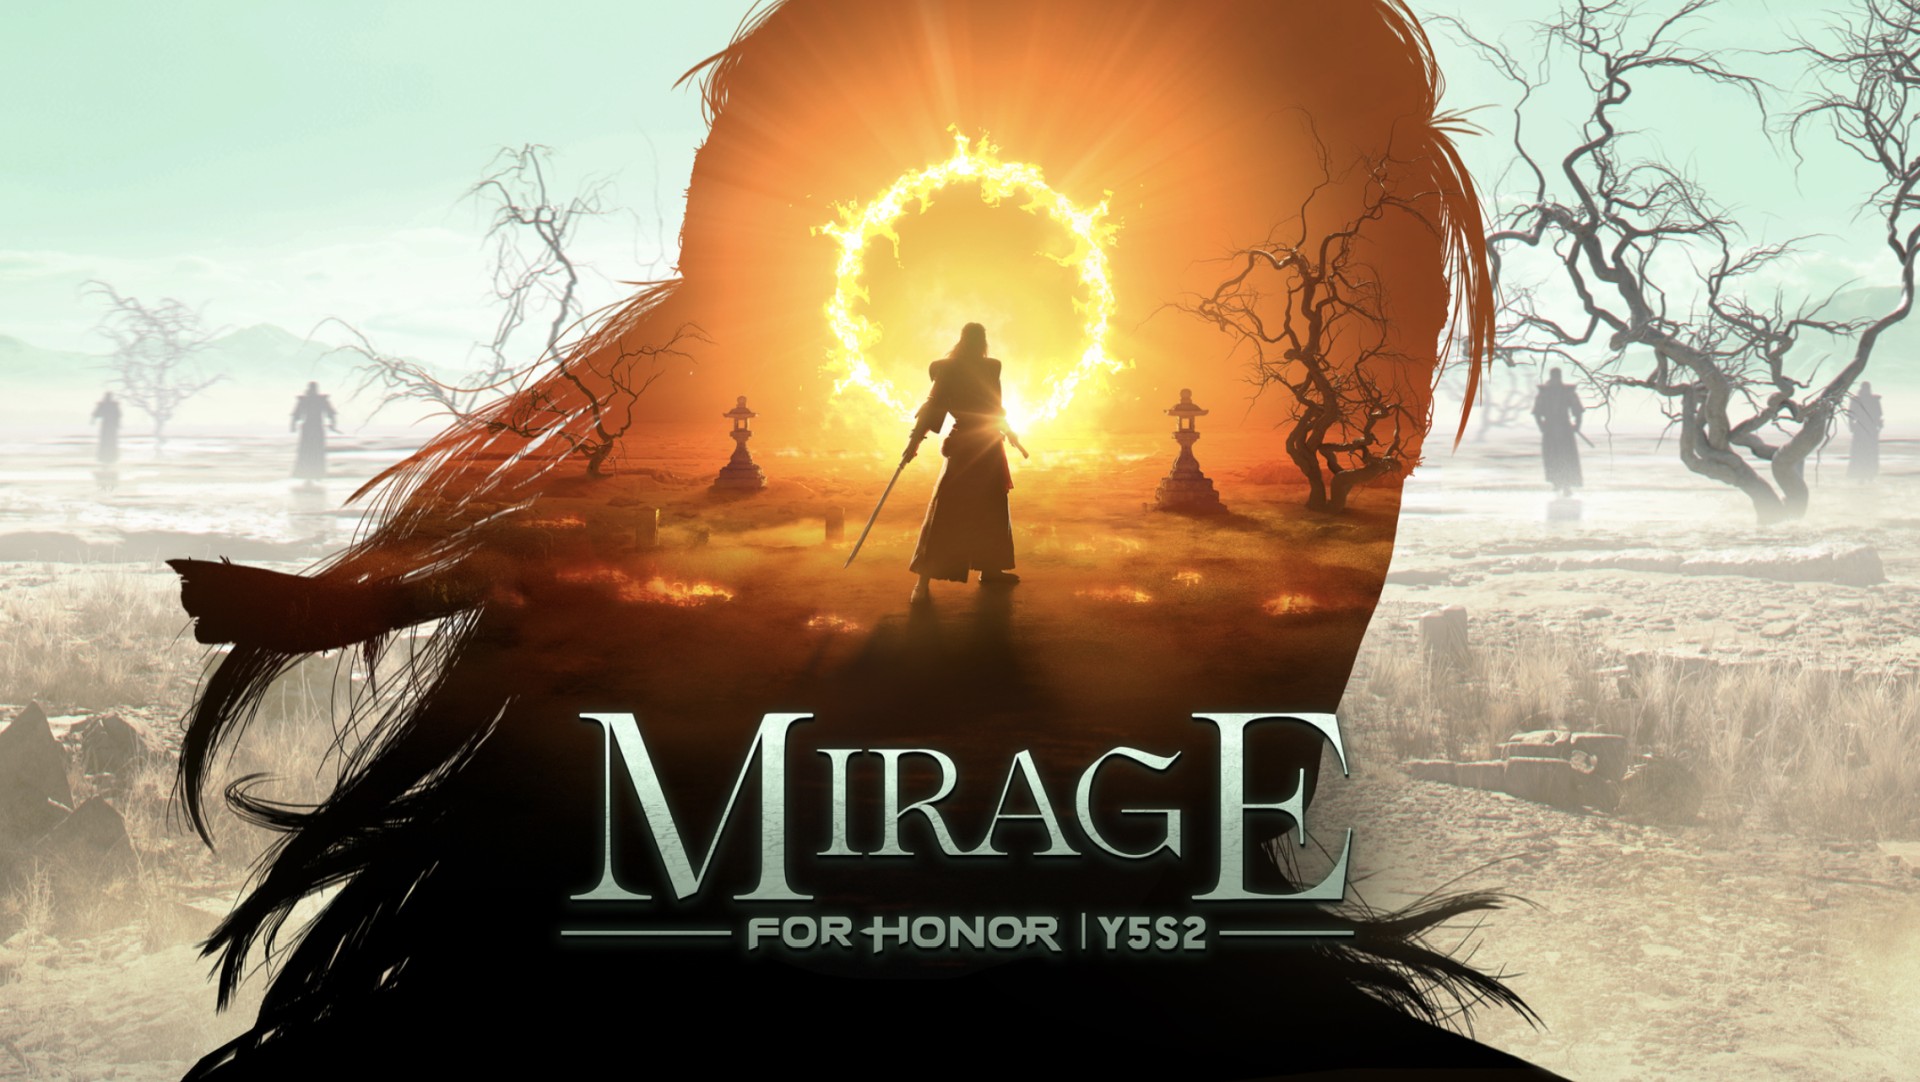 Video For For Honor Launches Year 5 Season 2: Mirage with Visions of the Kyoshin Event